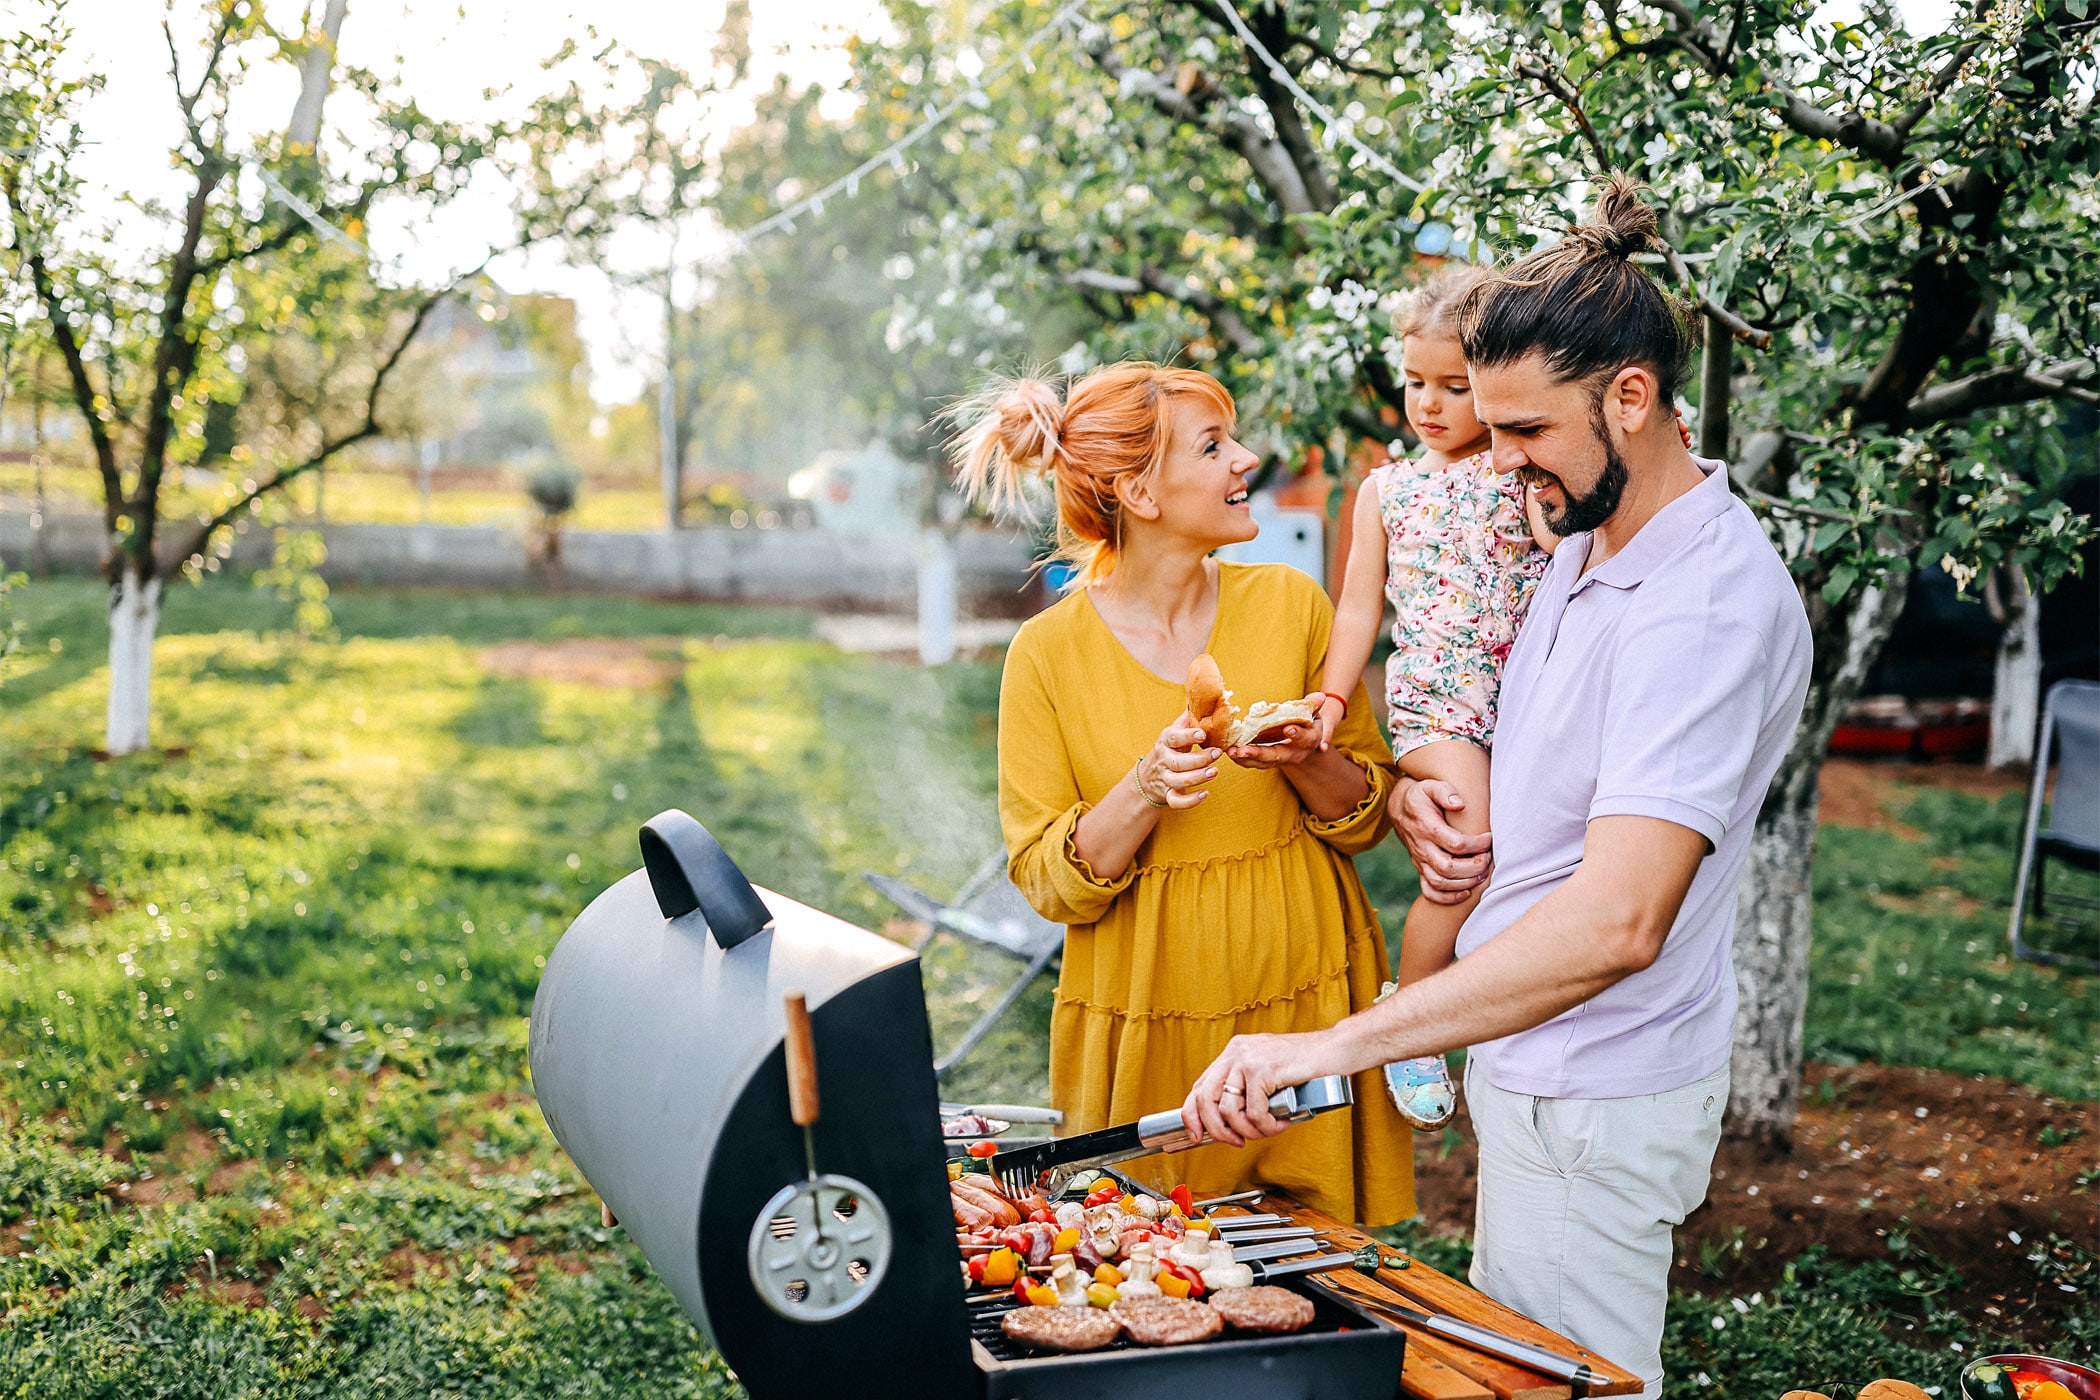 Family preparing meal in backyard on barbecue grill